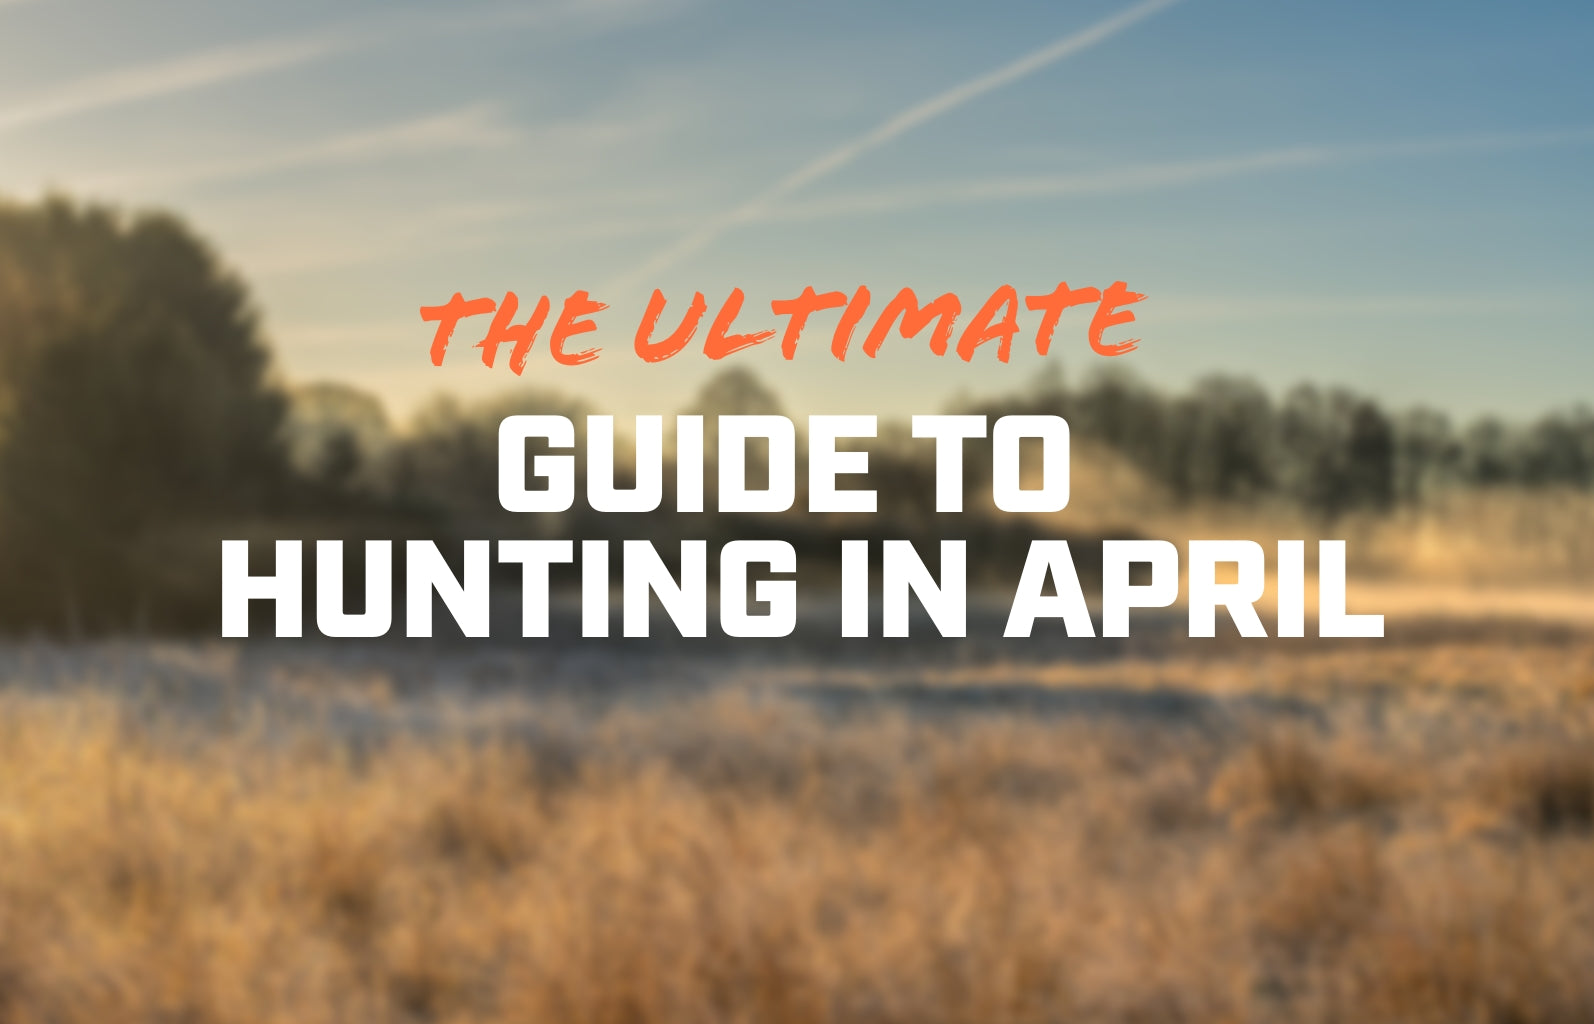 The Ultimate Guide to Hunting in April